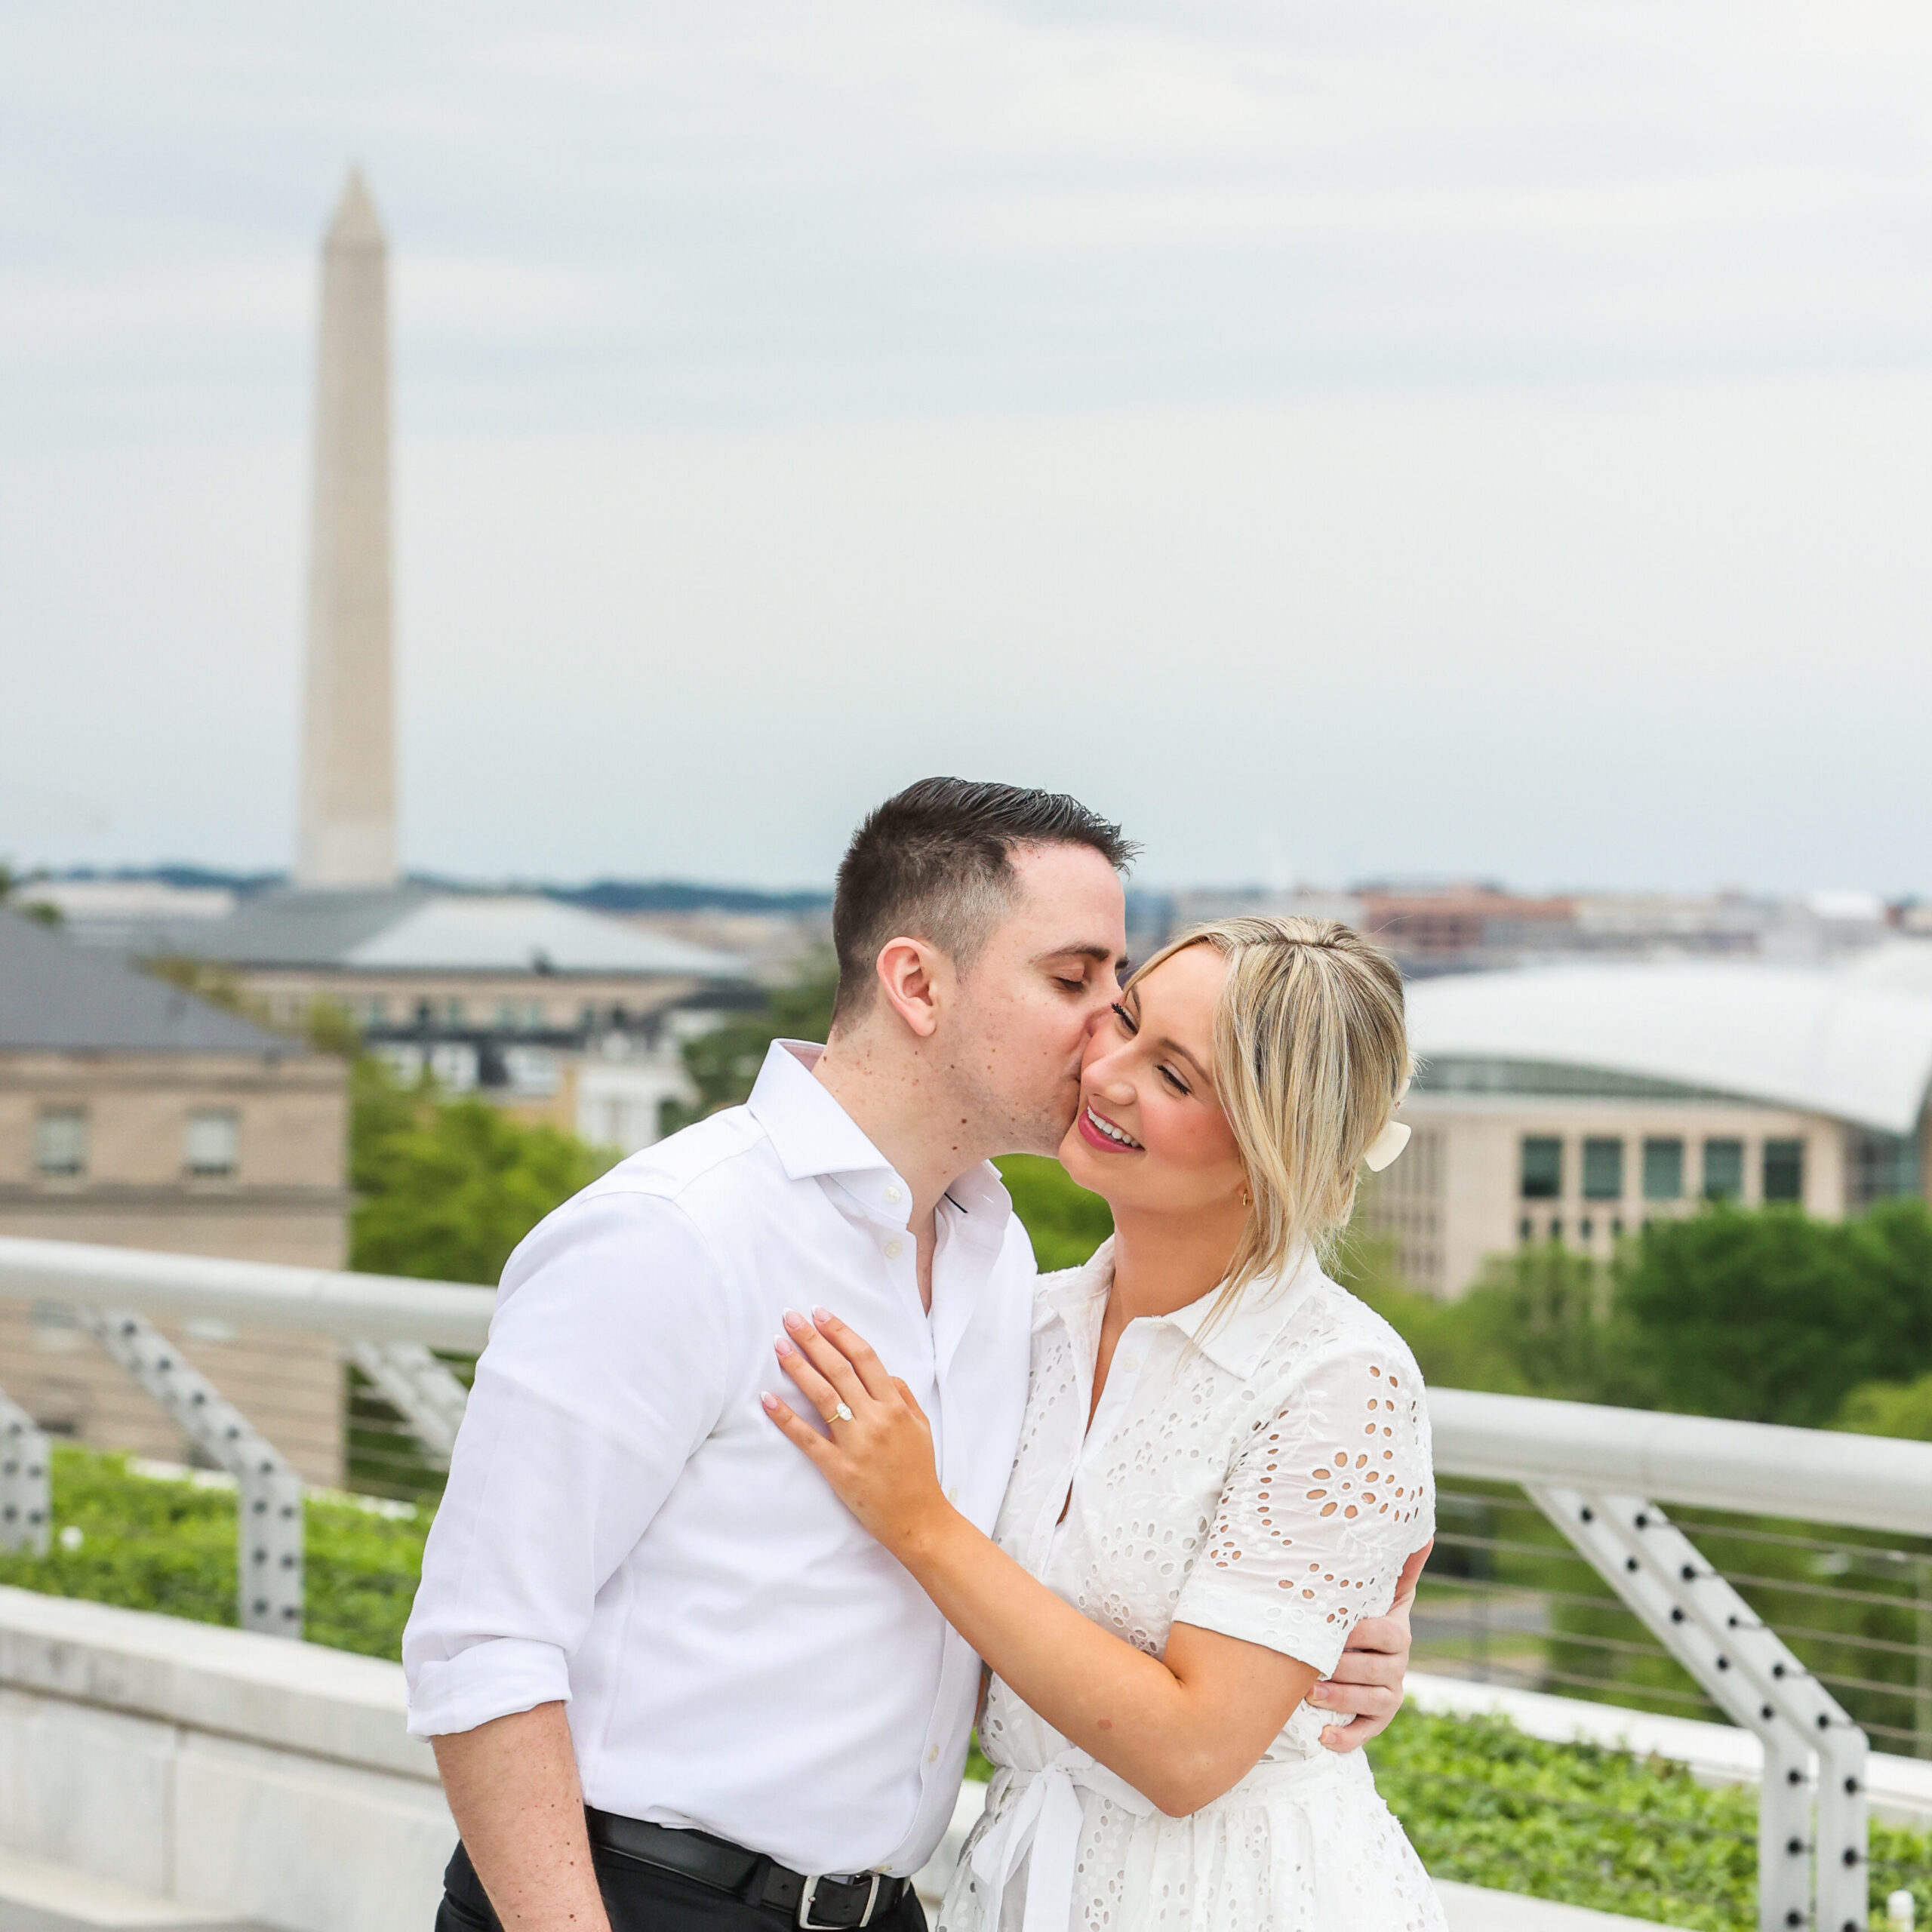 Couple in Washington, DC after a marriage proposal